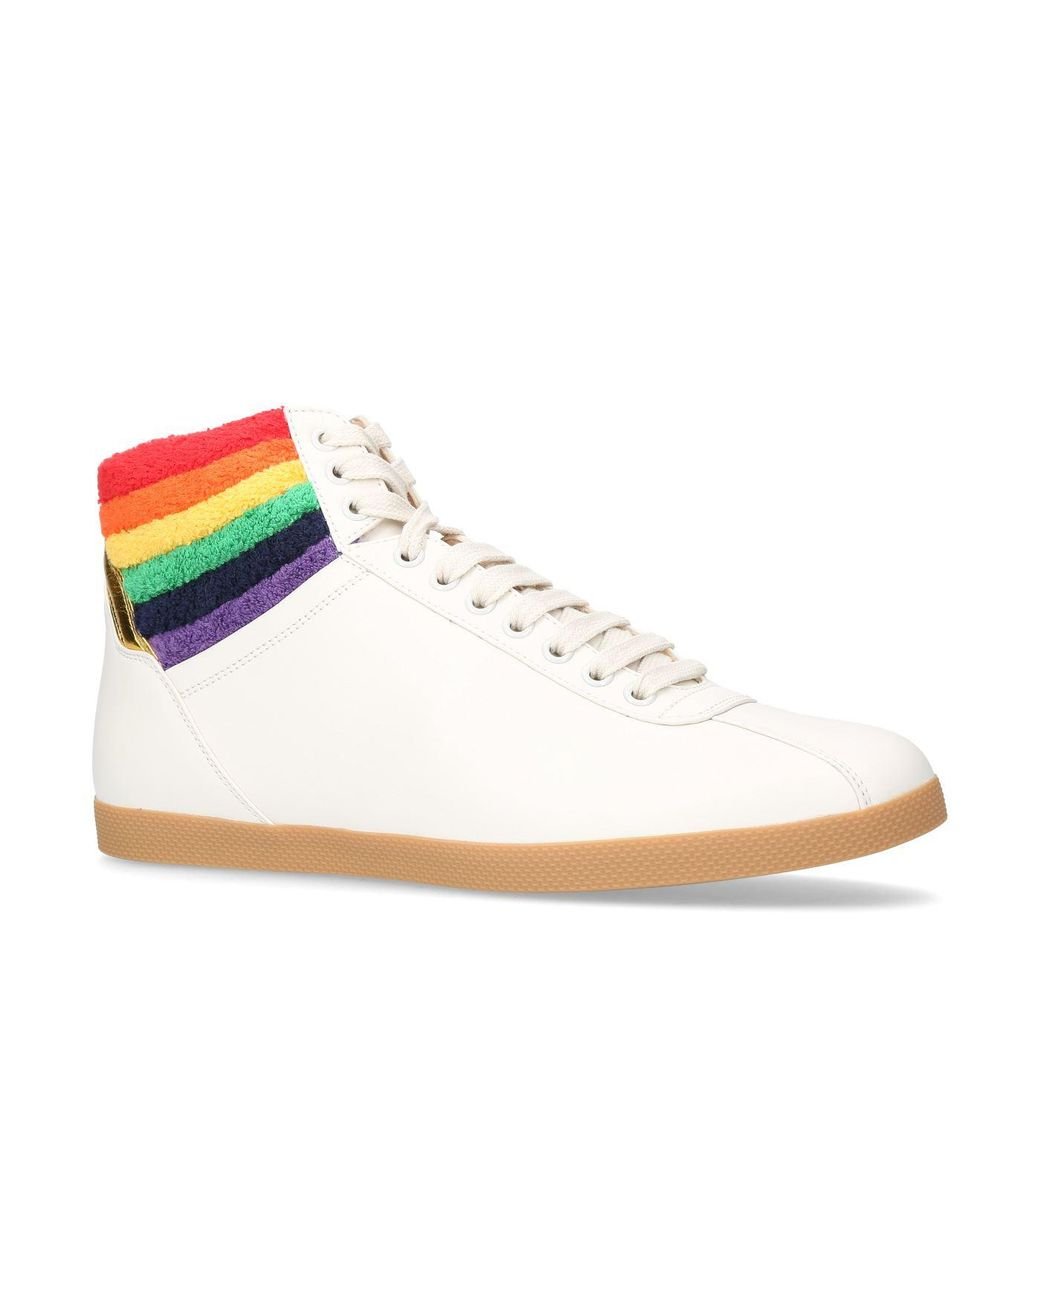 Gucci Bambi Rainbow High-top Sneakers in White | Lyst